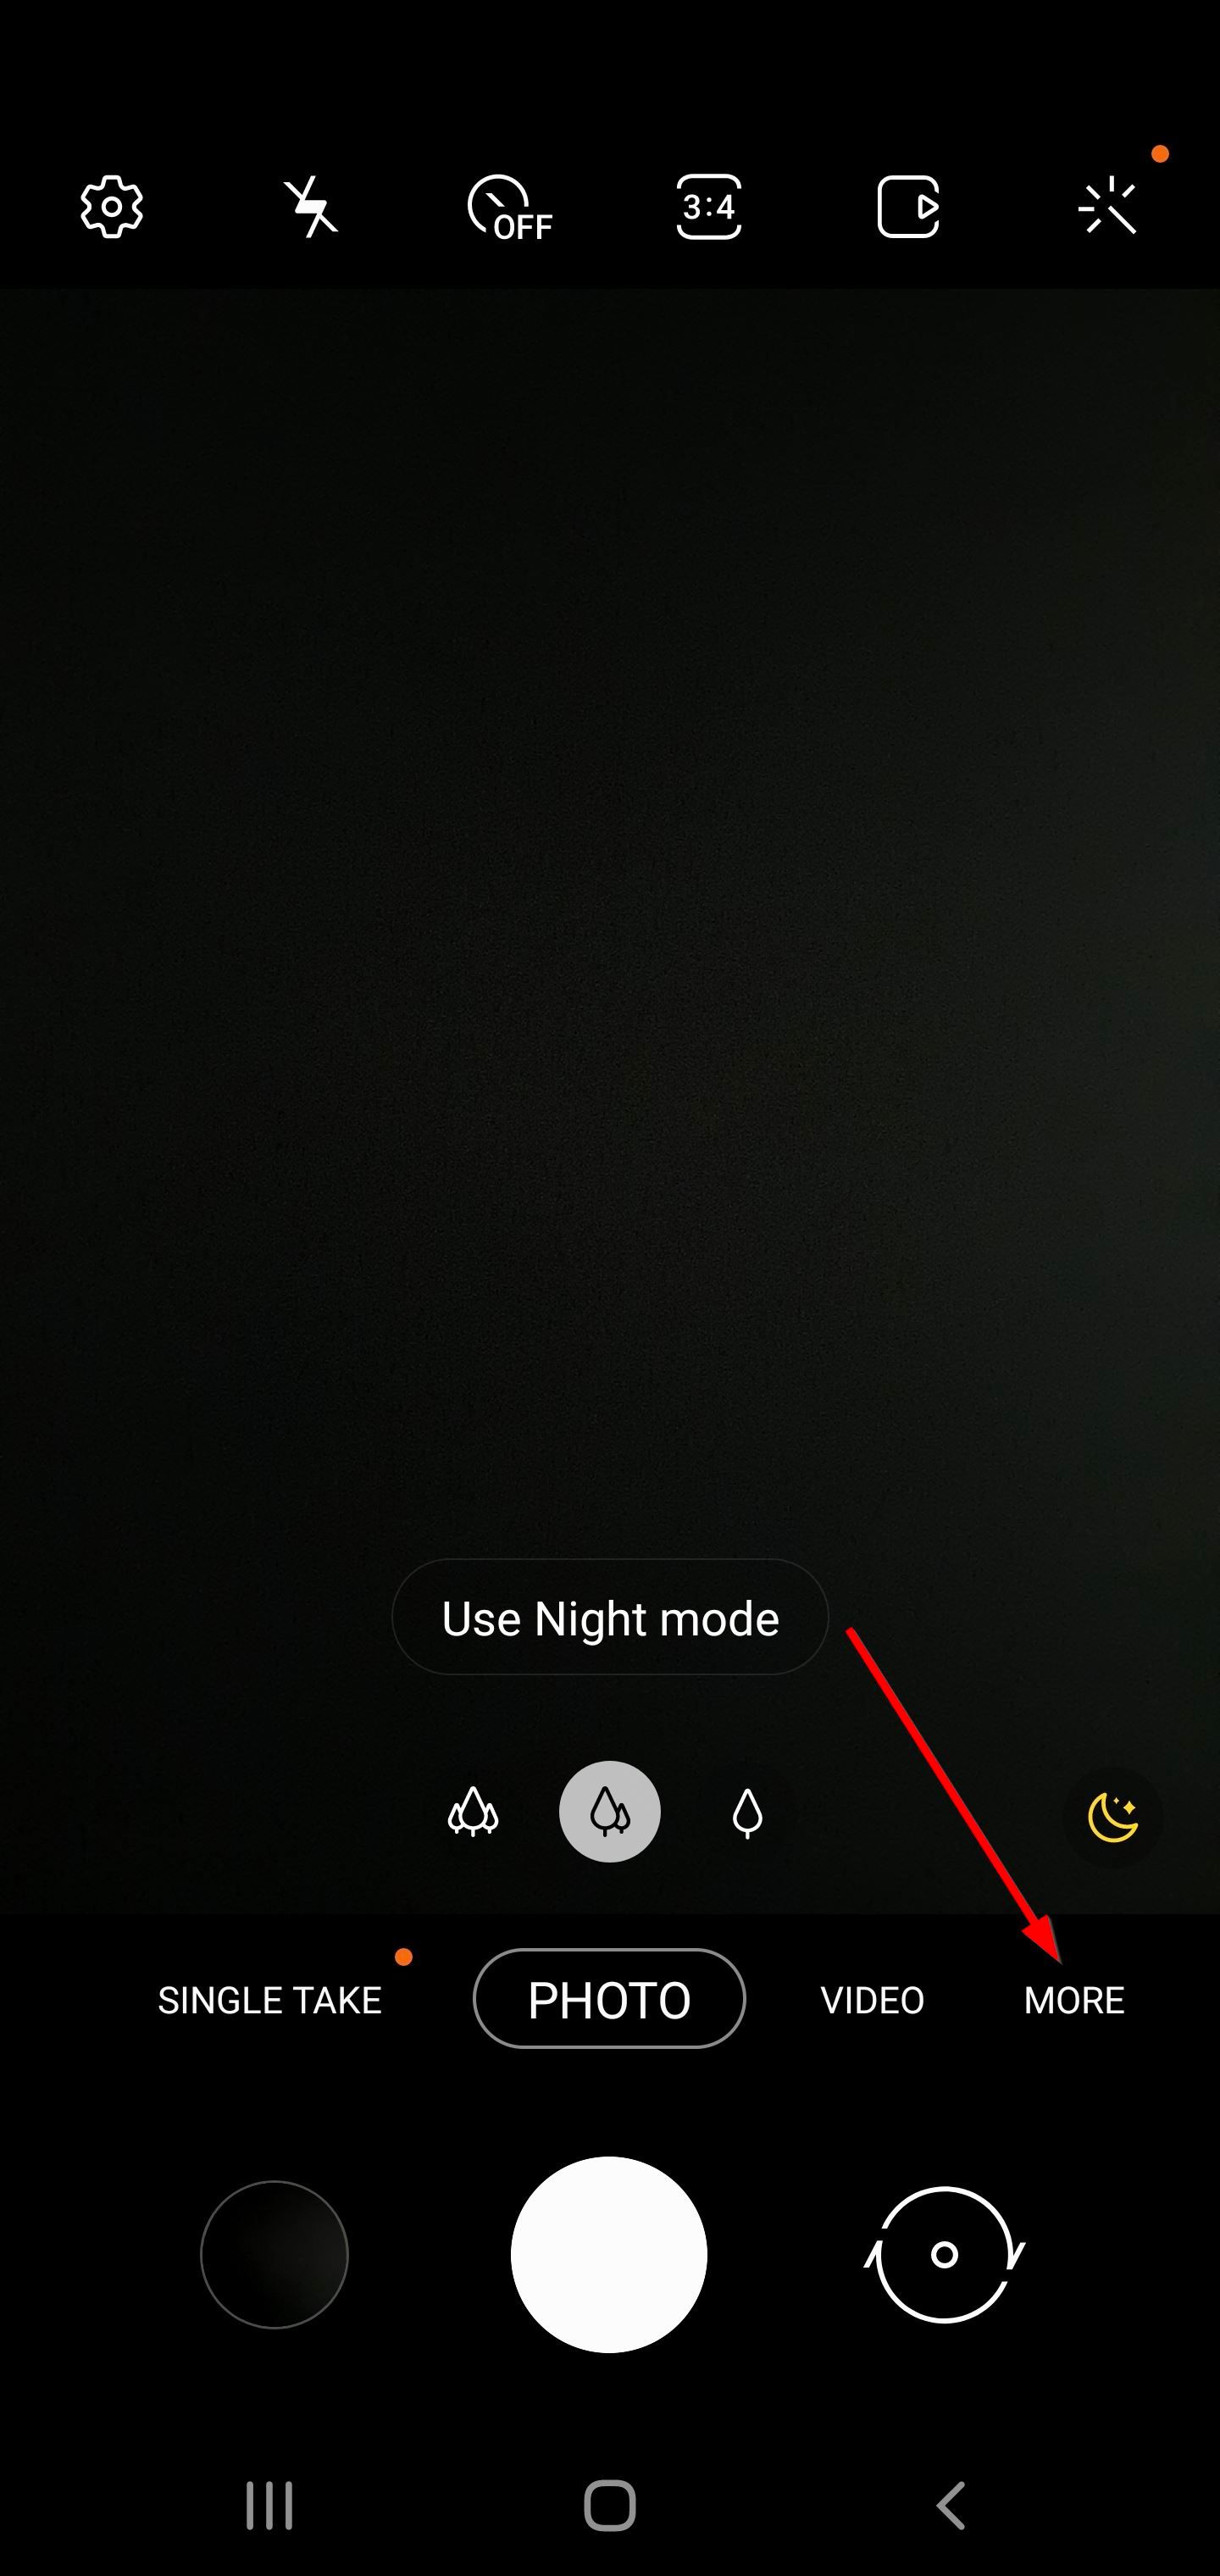 Solved: funny filters on camera - Samsung Community